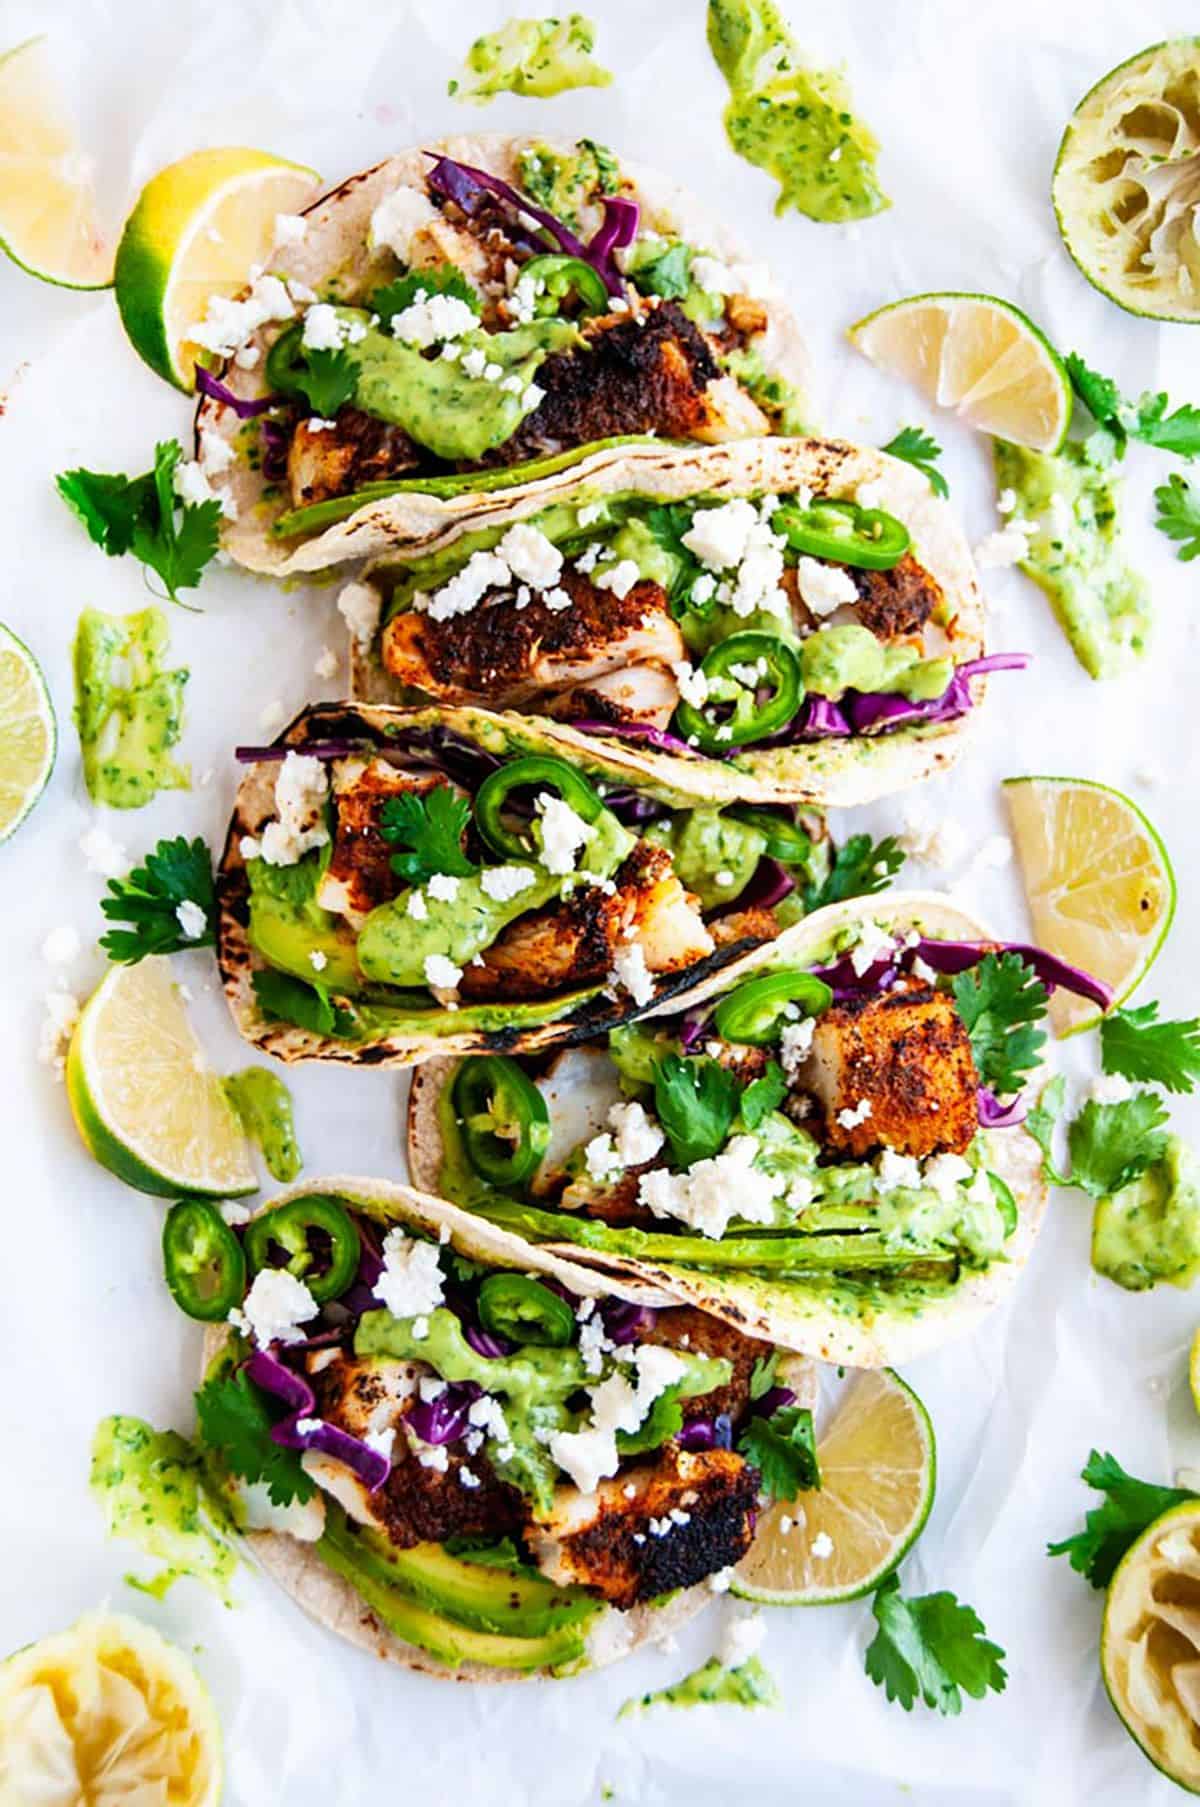 Blackened Cod Fish Tacos with Cilantro Avocado Sauce on parchment paper.